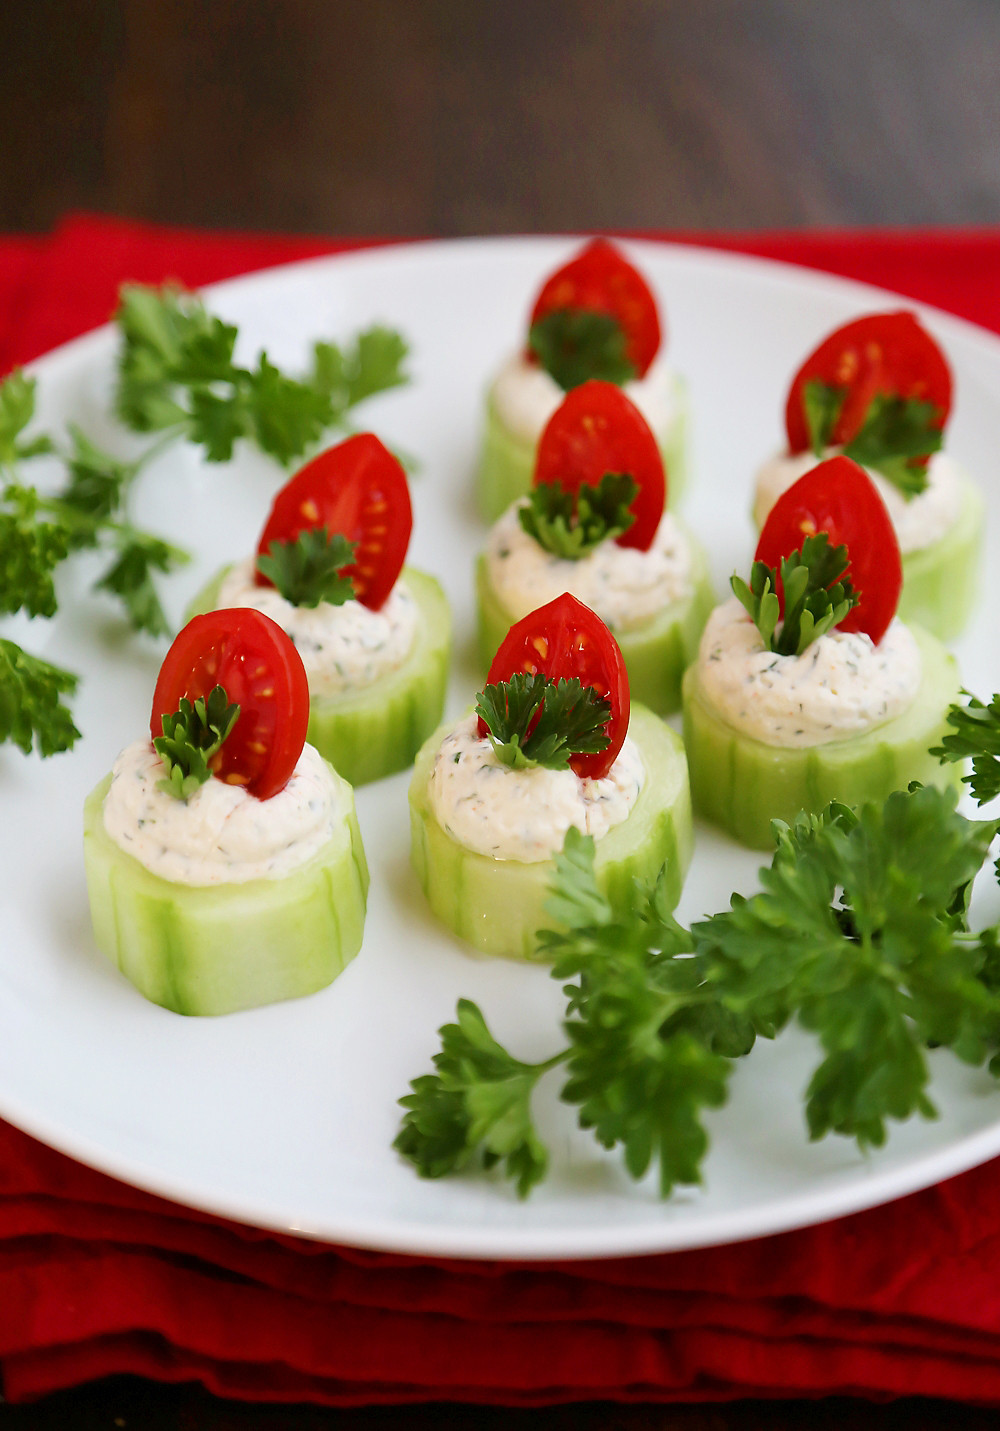 Cucumber Cream Cheese Appetizers
 Cucumber Tomato Bites with Creamy Parmesan Herb Spread